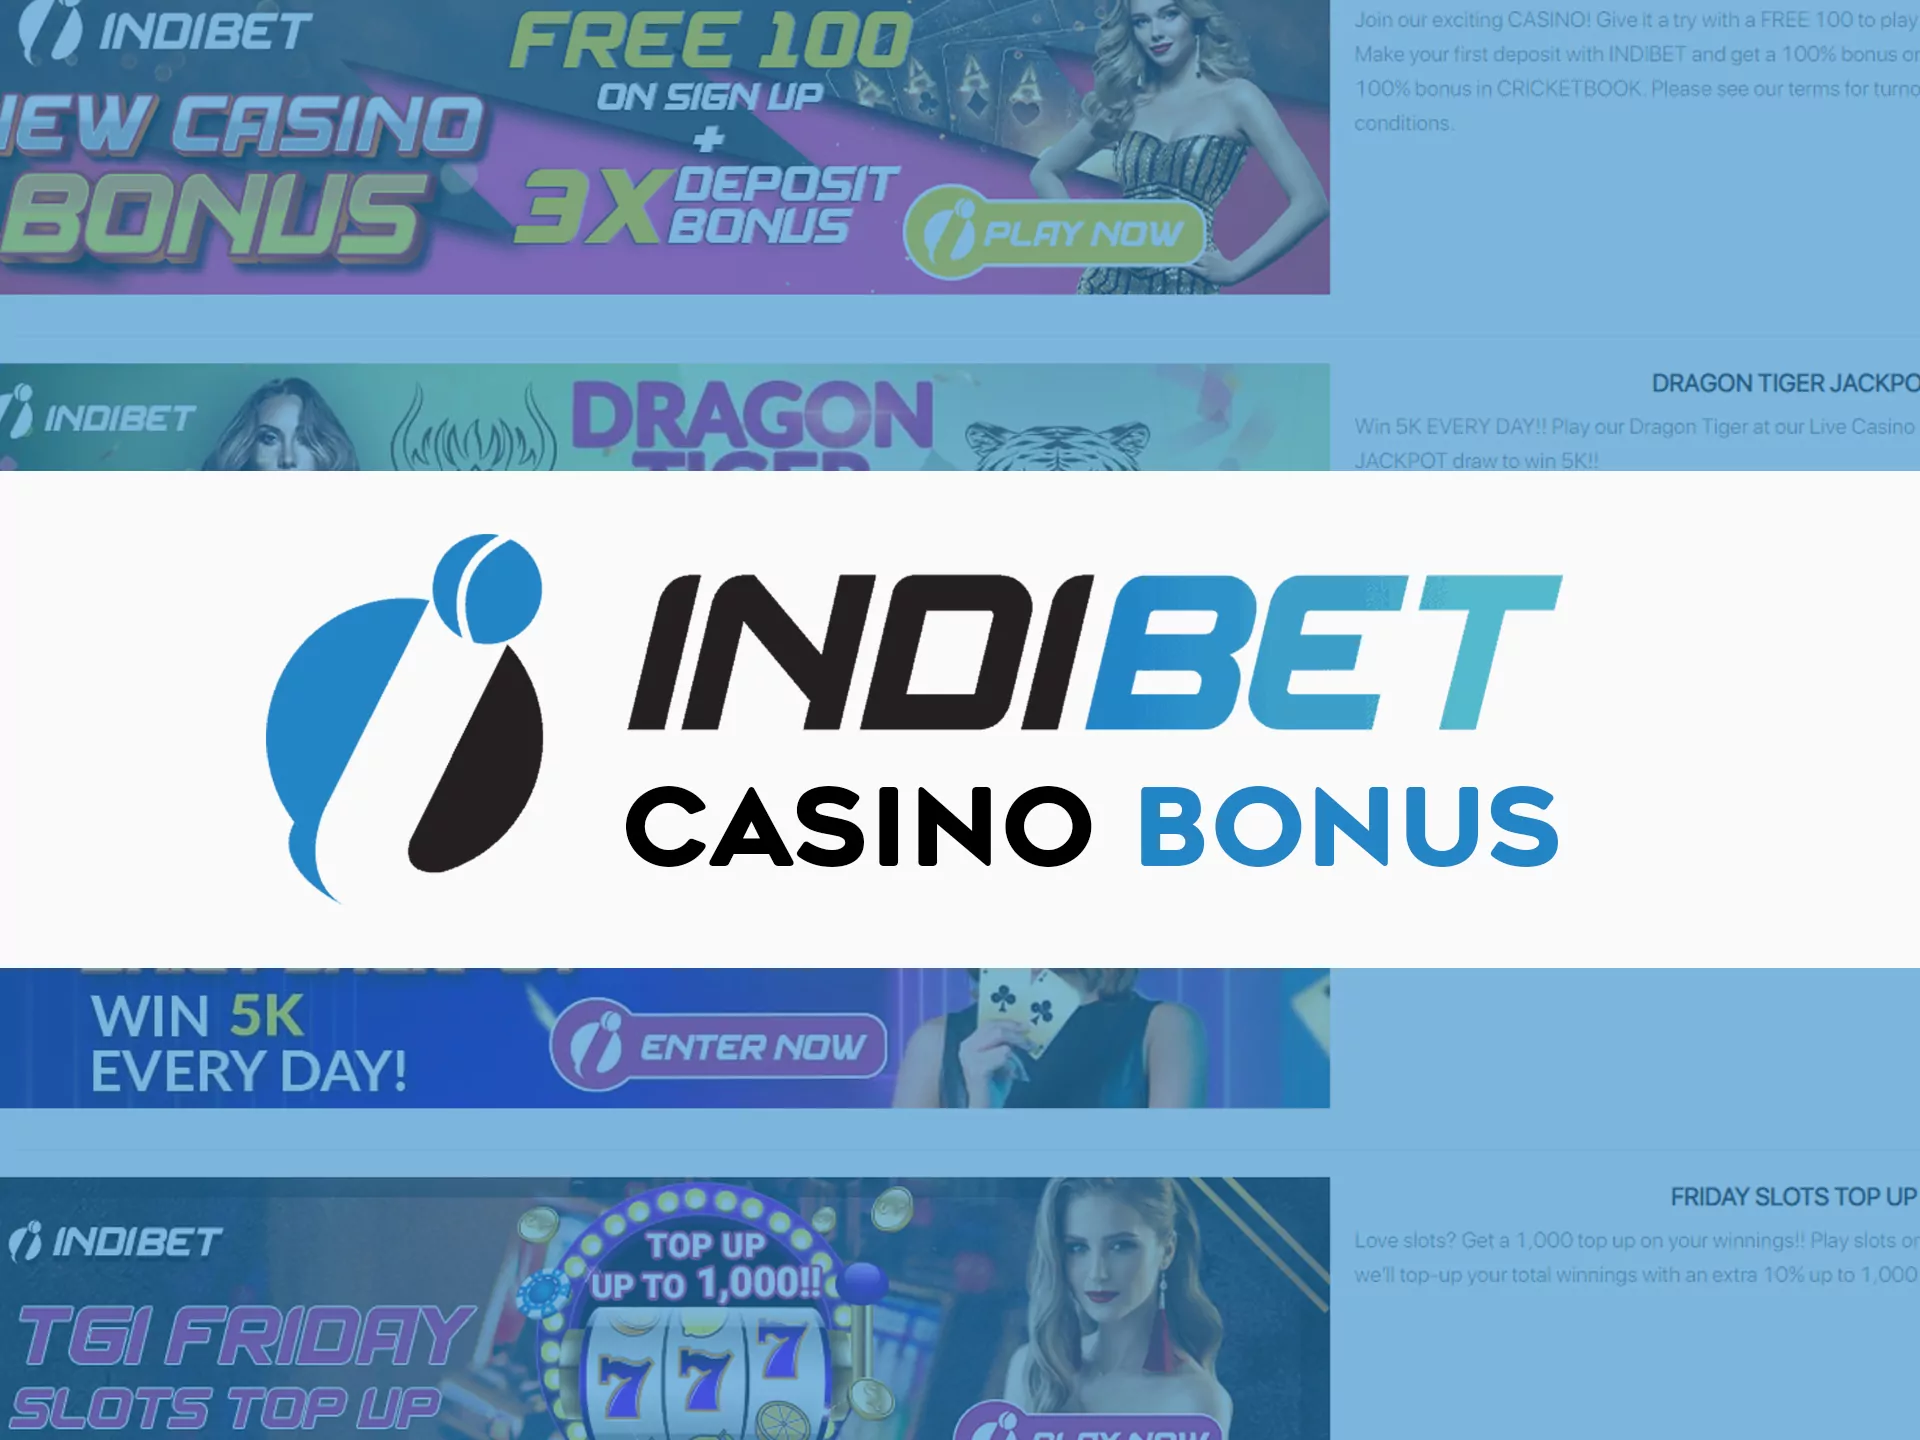 Double your deposit amount with the casino bonus and use it at slots.